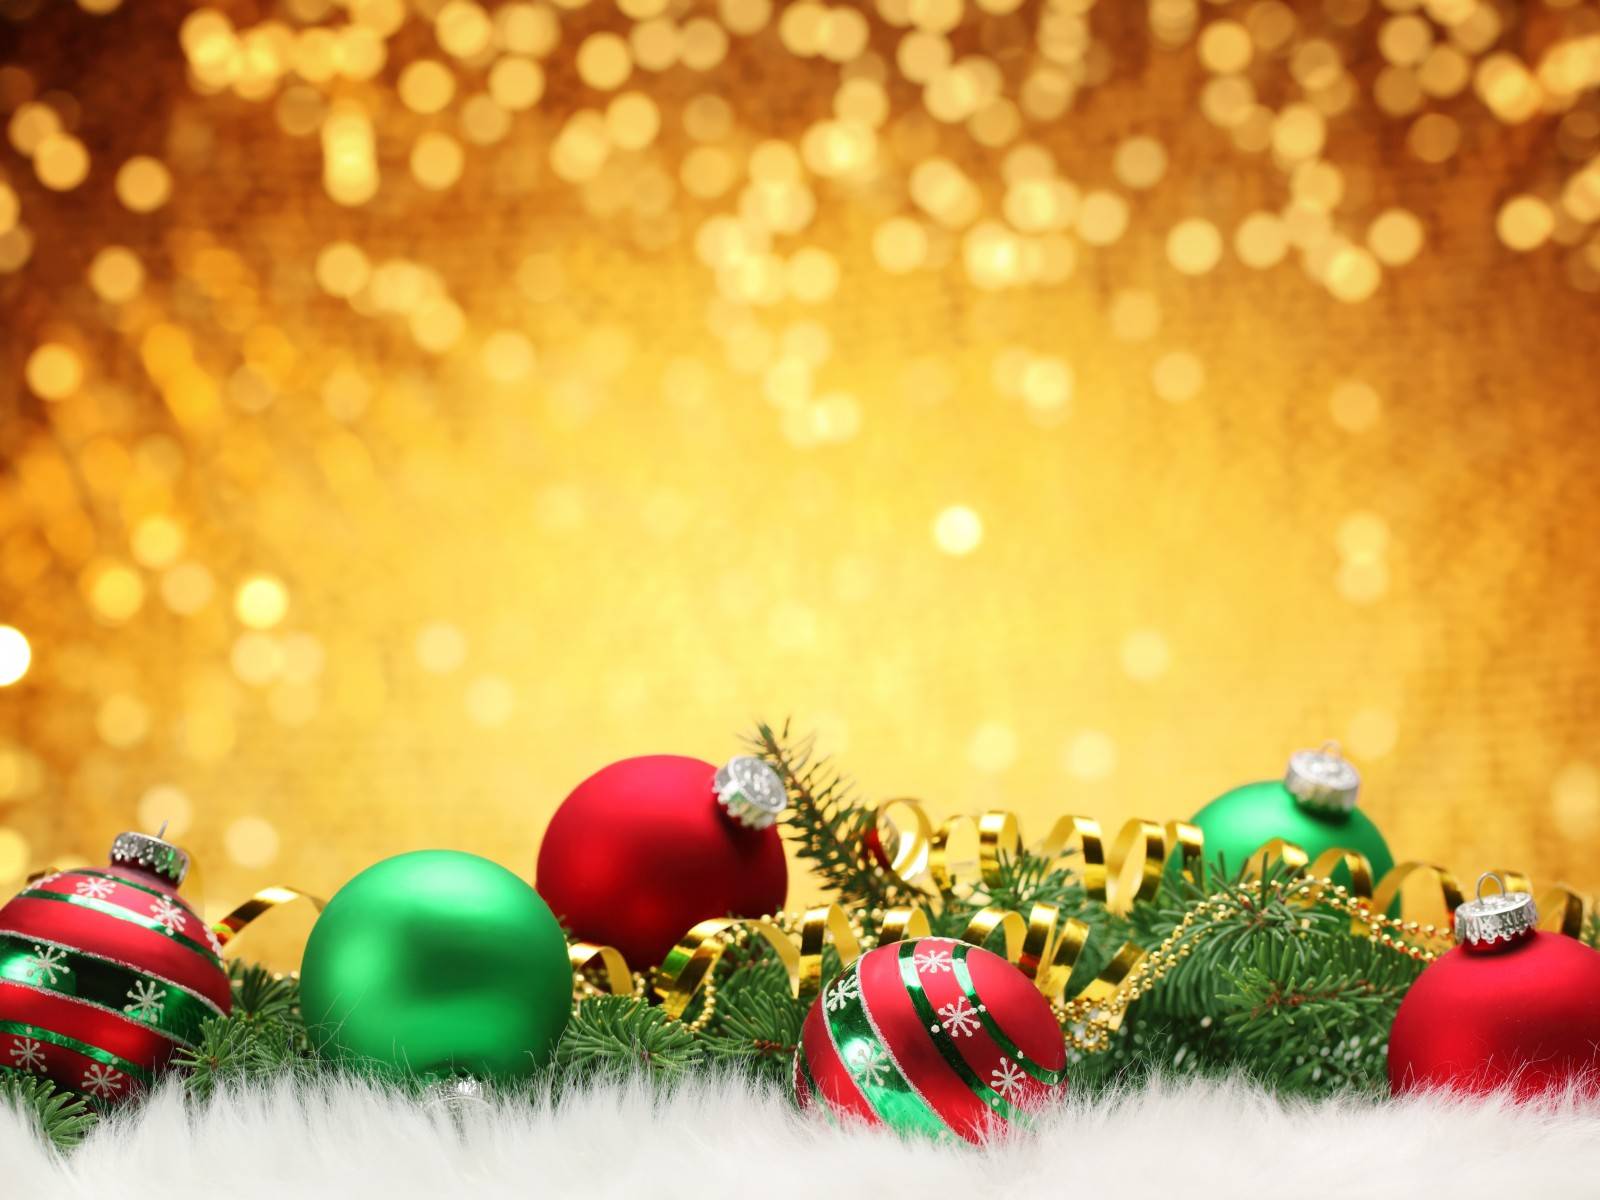 download christmas backgrounds photoshop